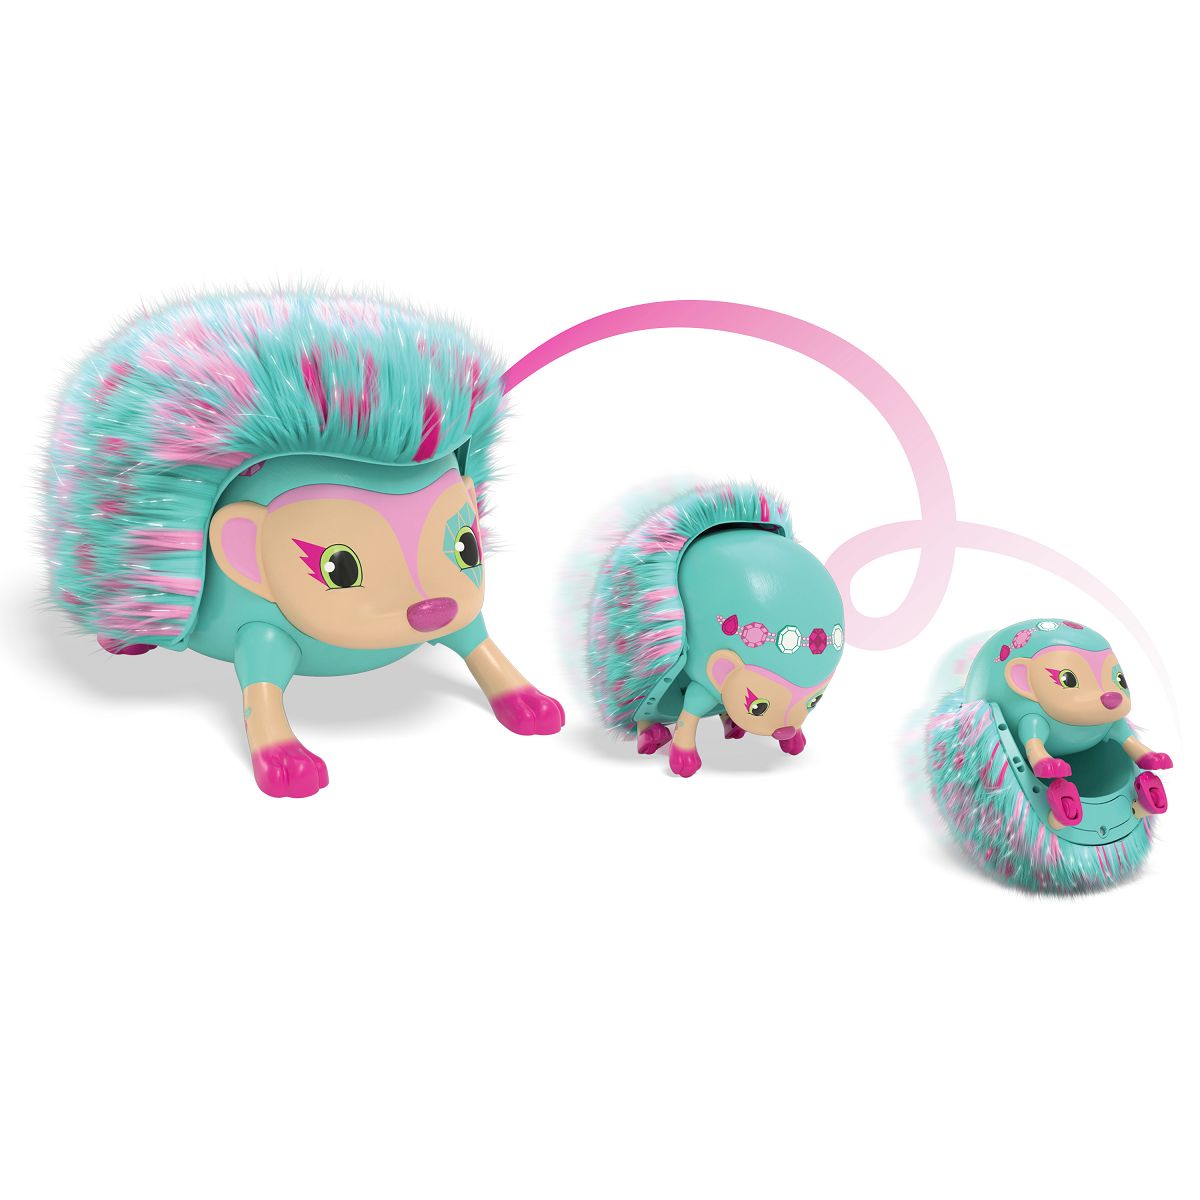 Zoomer Hedgiez Interactive Hedgehog with Lights, Sounds and Sensors by Spin Master Teal